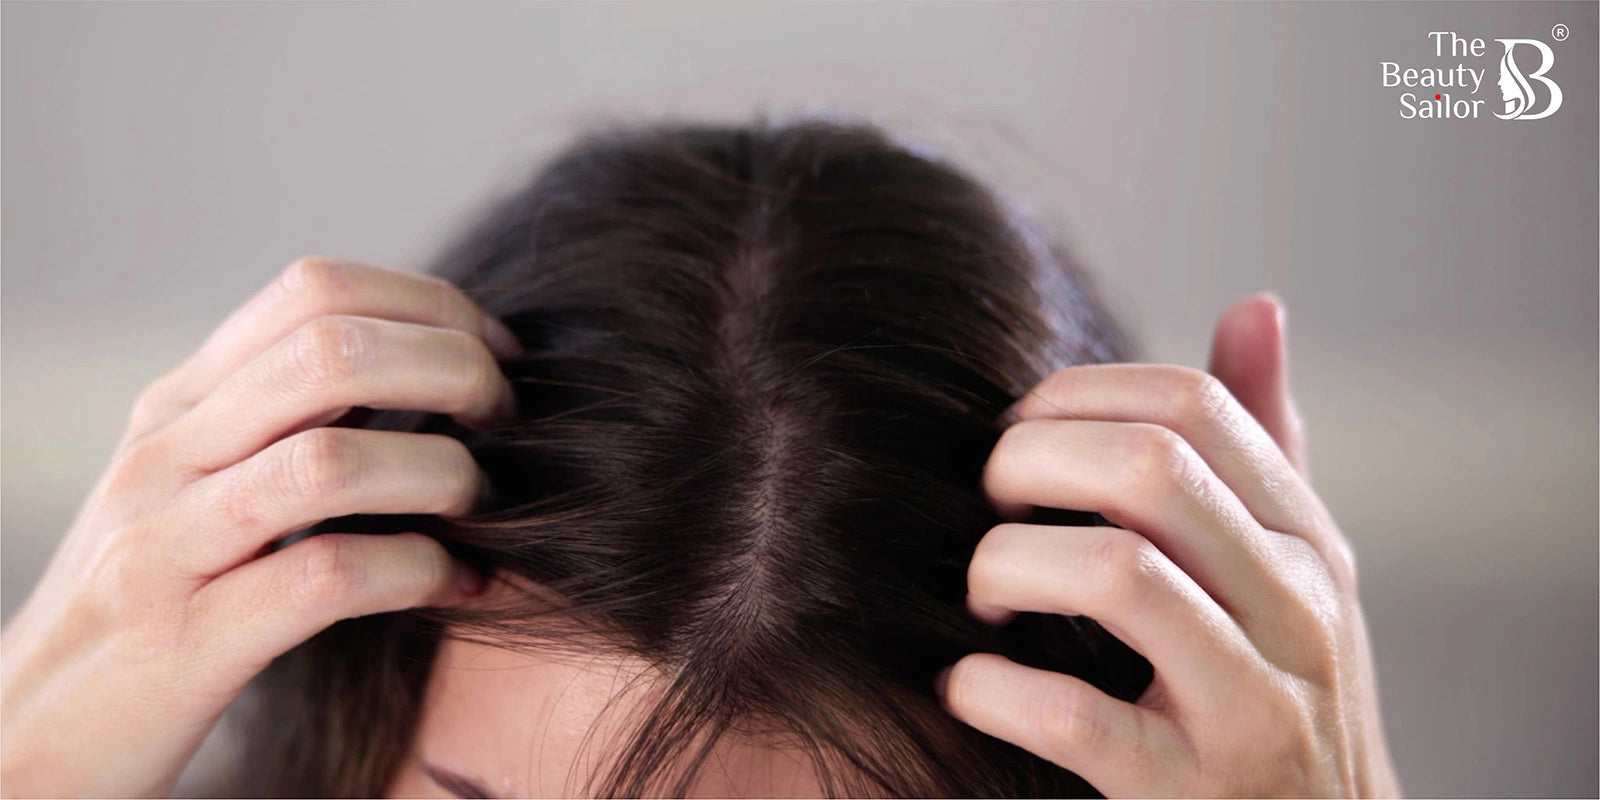 Scalp Care: Solution for Itchy, Flaky, and Irritated Scalp